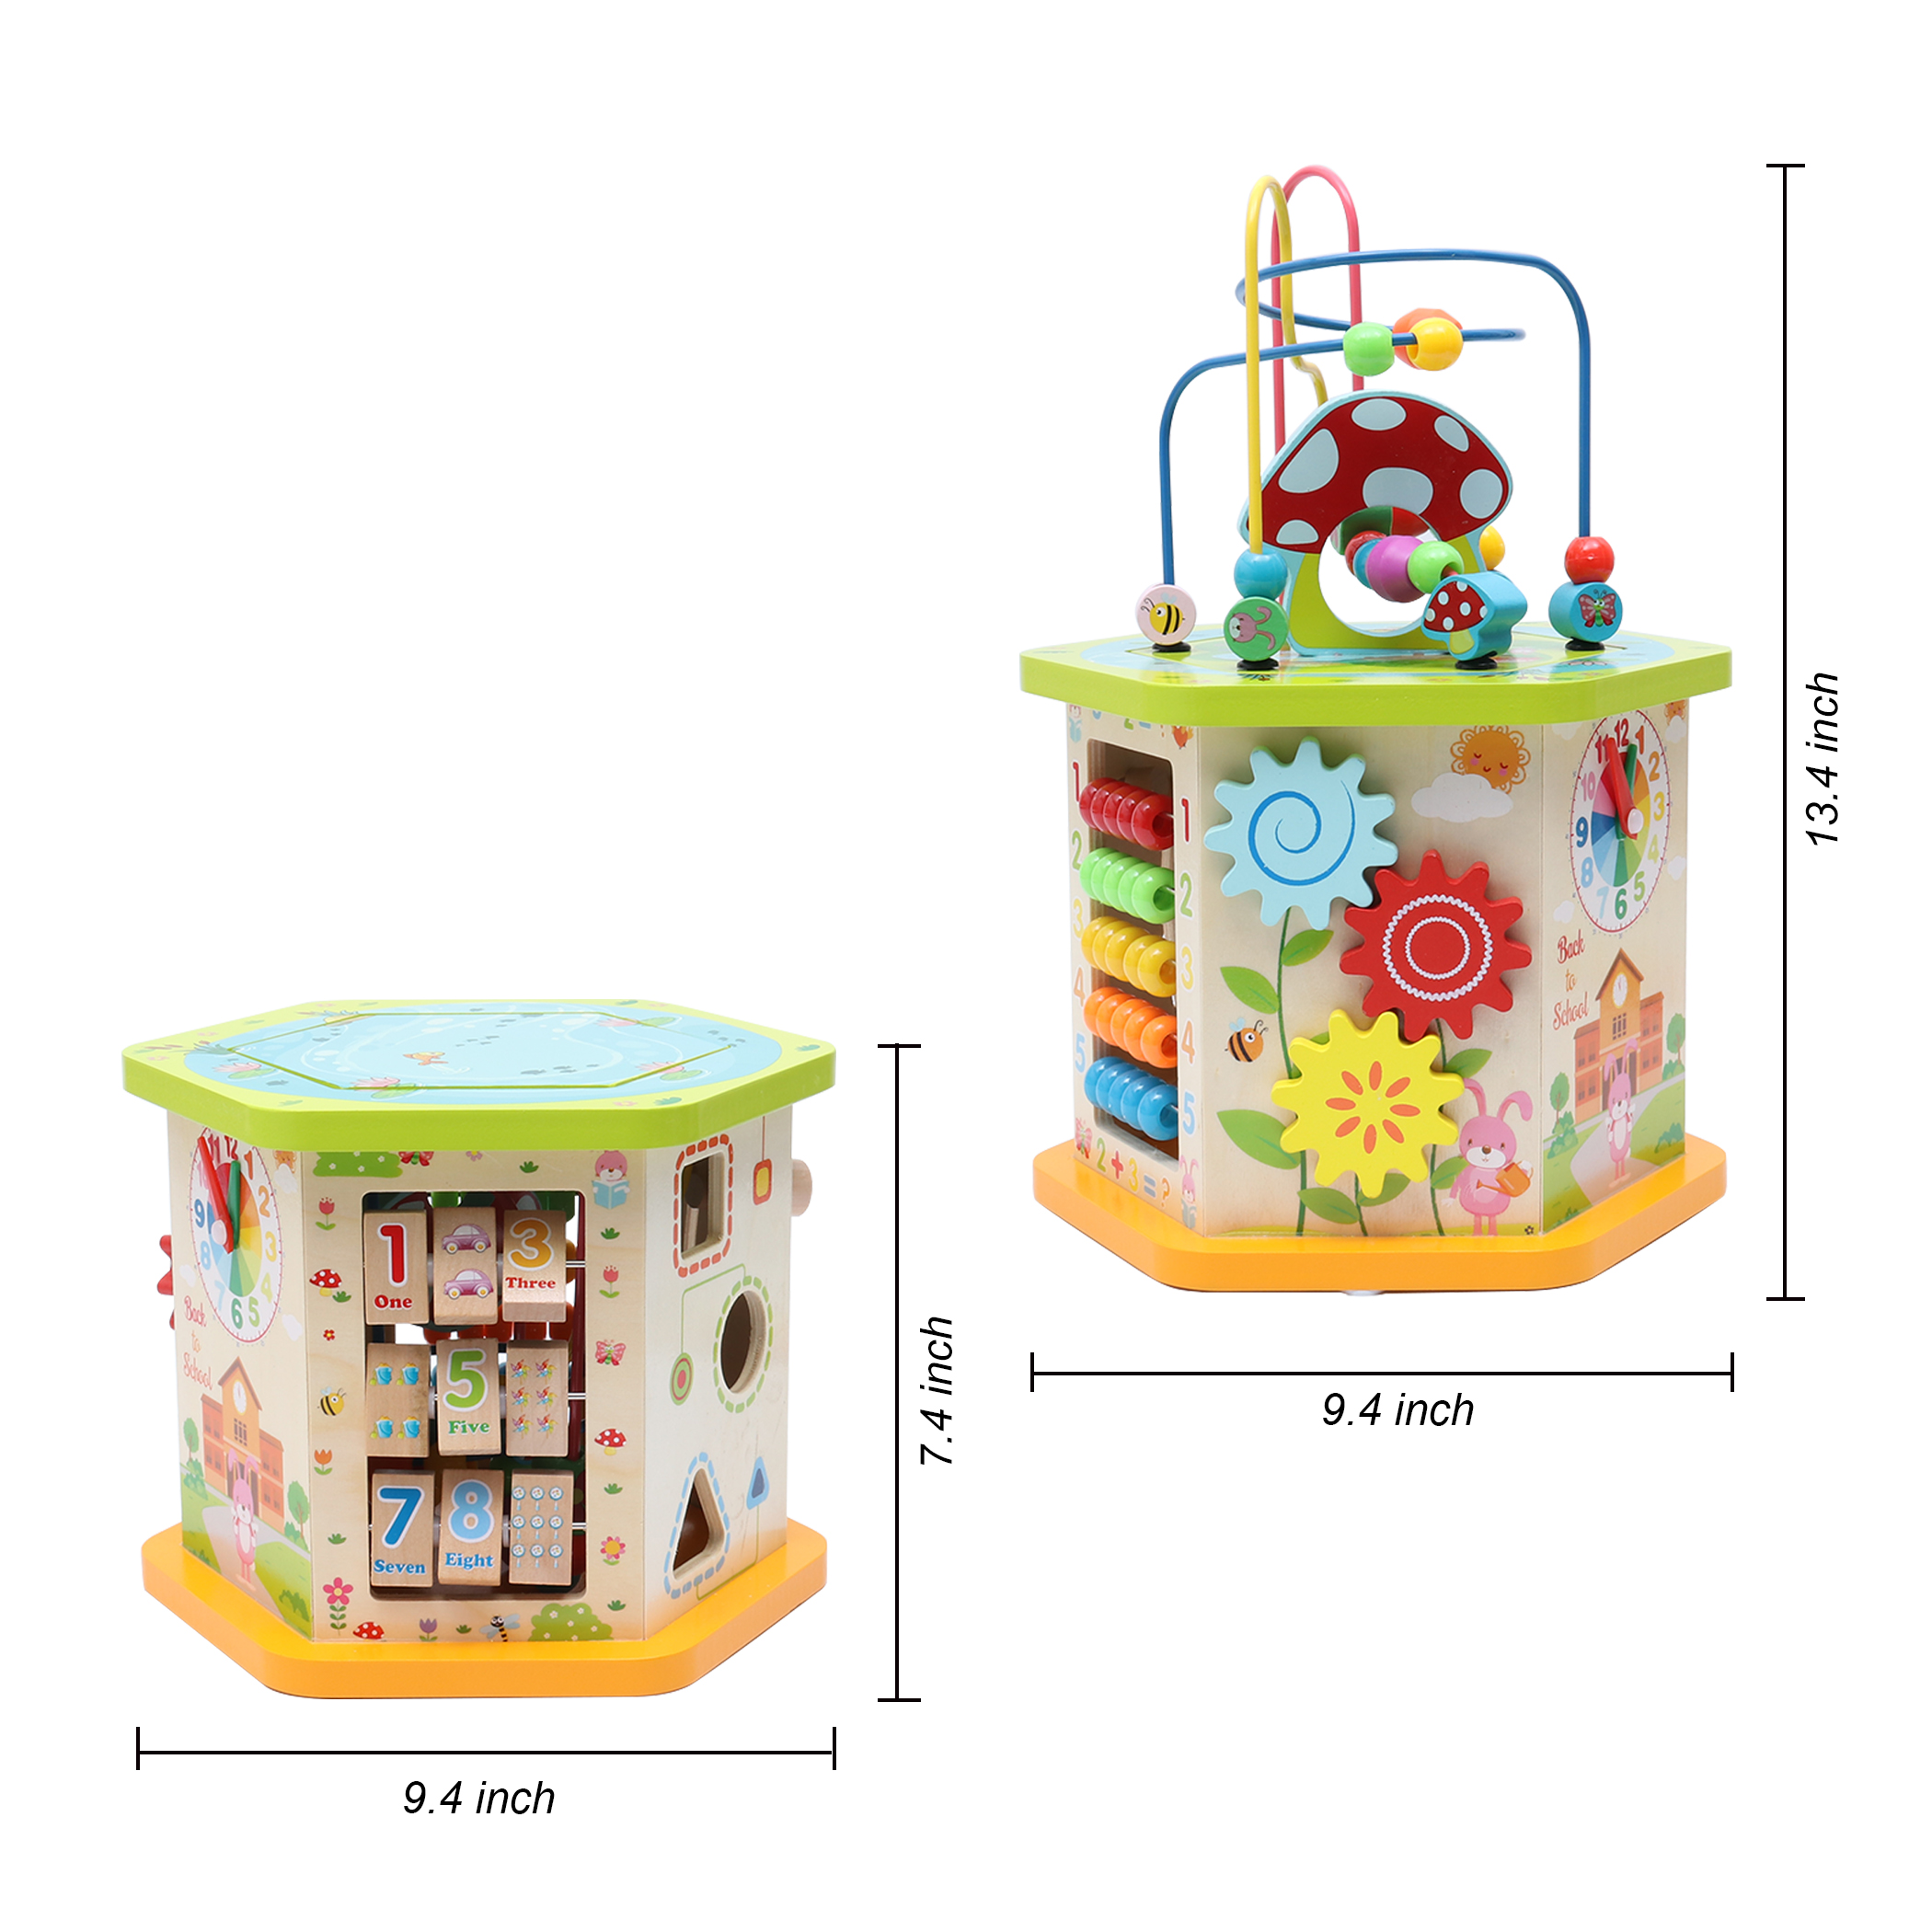 Lavievert 9-in-1 Play Cube Activity Center Multifunctional Bead Maze Toddler Educational Toys Game … - image 4 of 6